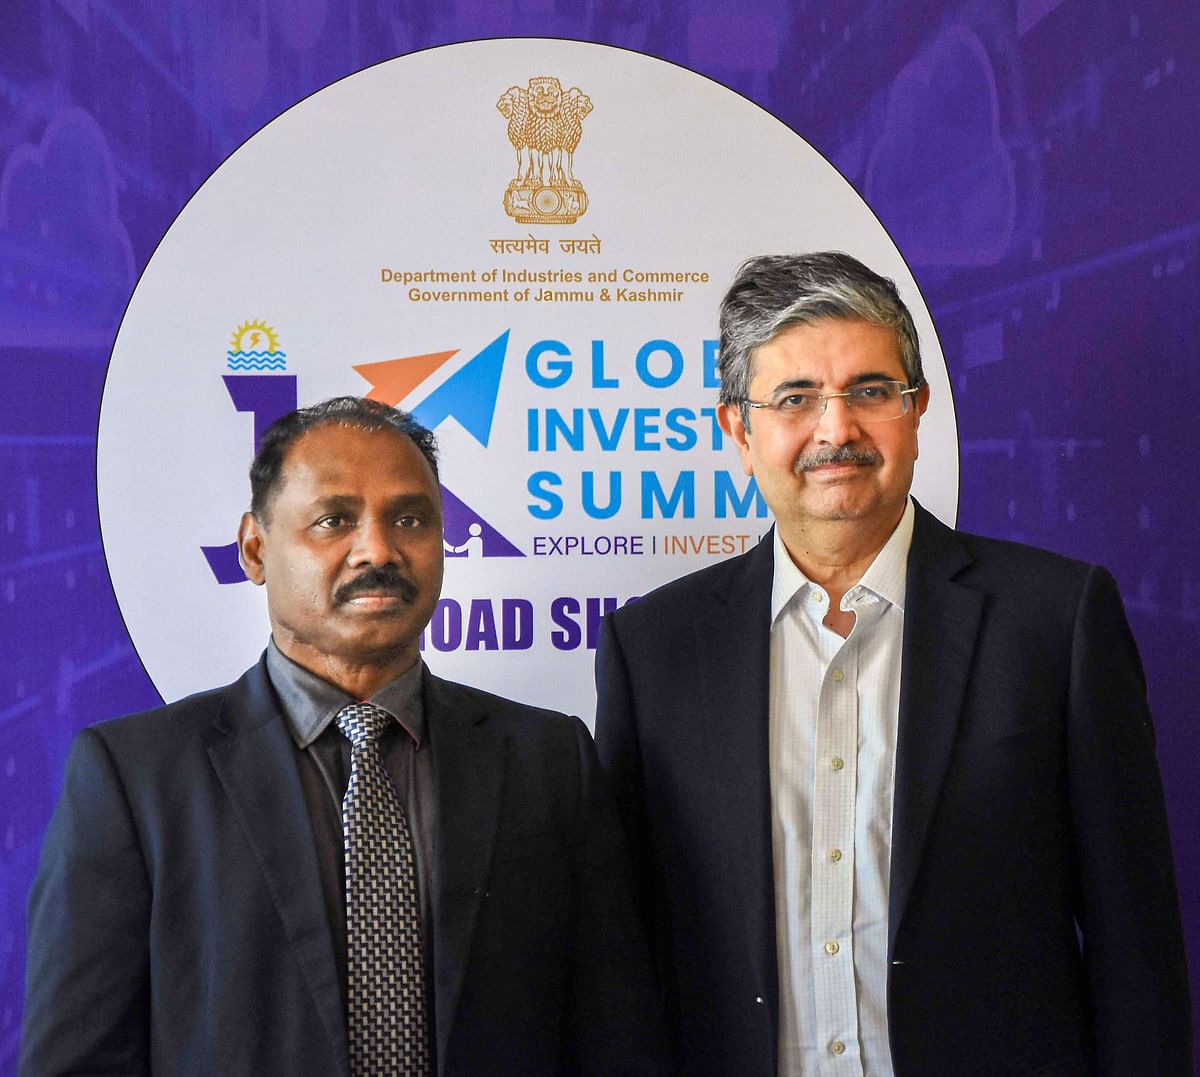 J&K organises show in Mumbai to woo investors for Global Investment summit